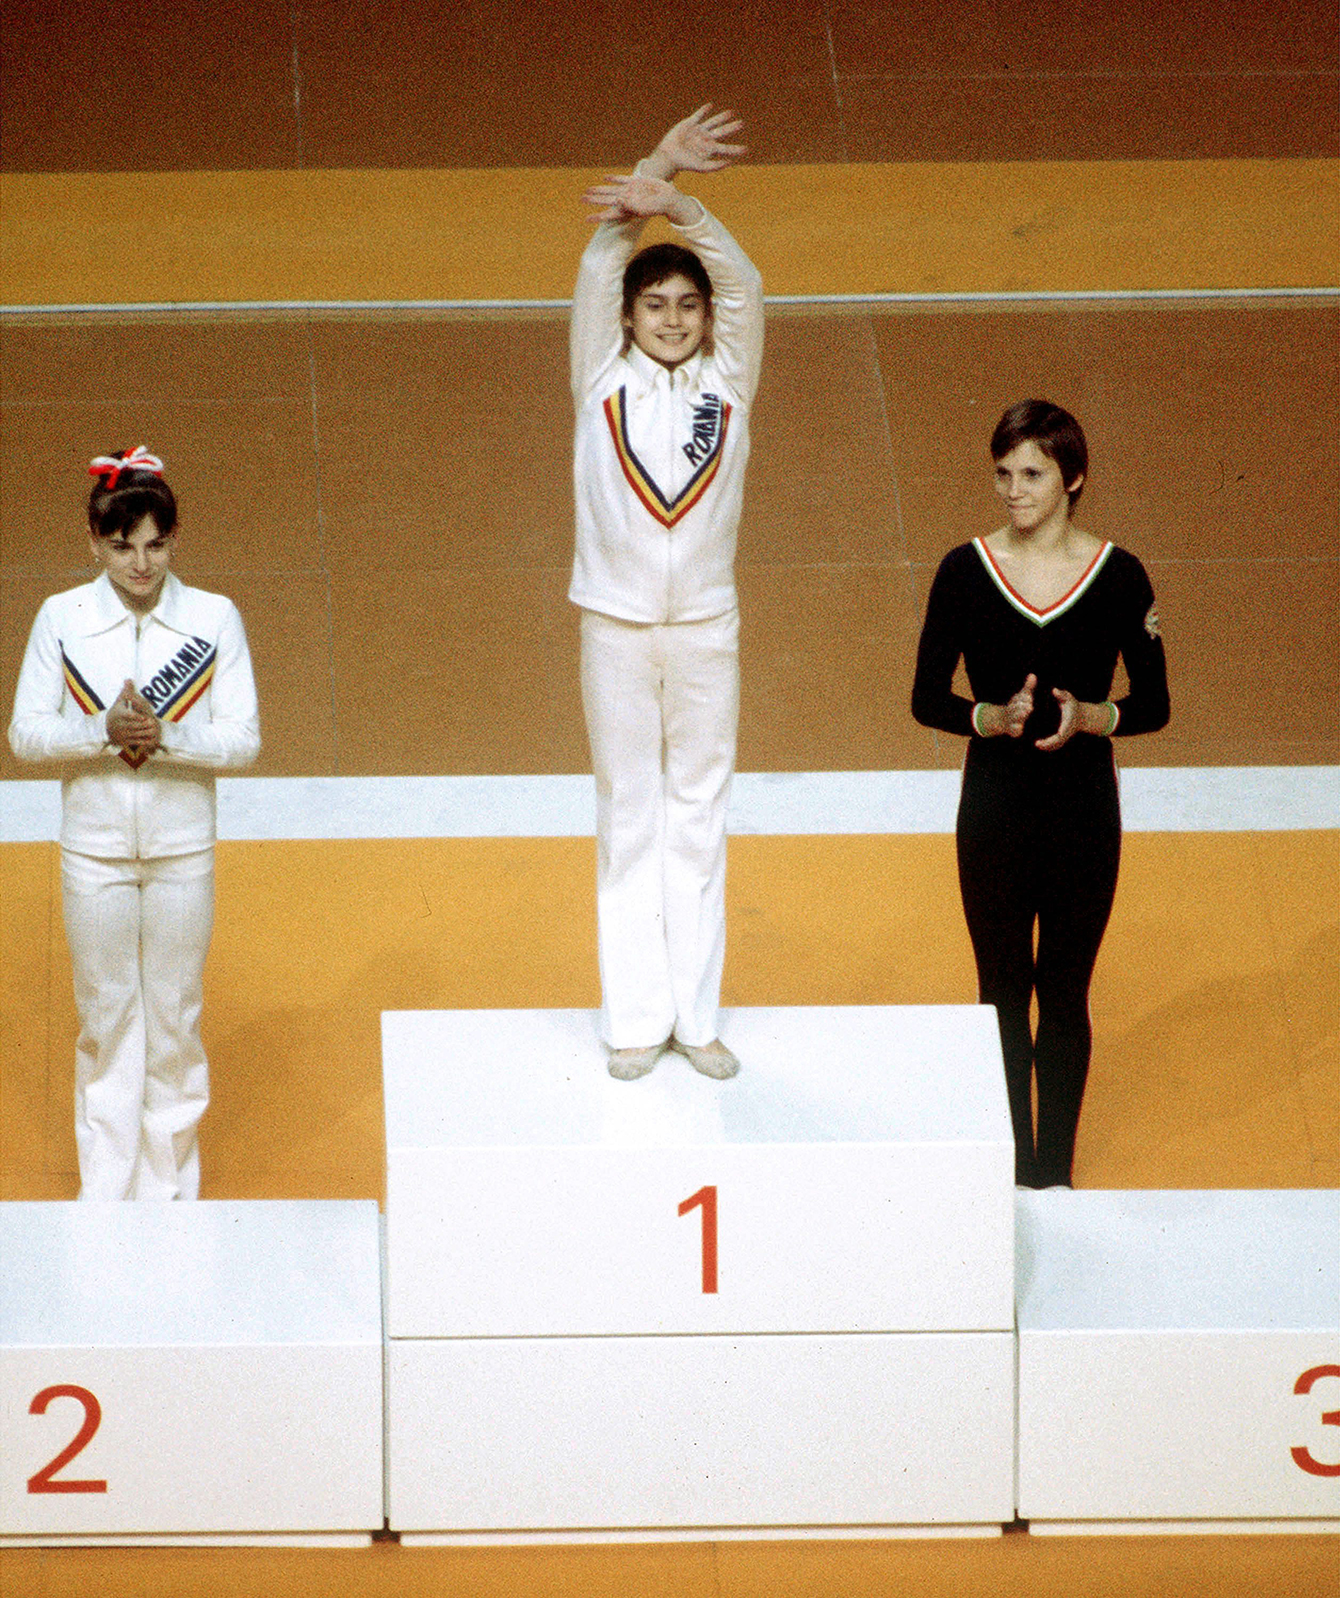 Then 14-year-old Nadia Comaneci (centre) on the podium after winning gold in the uneven bars at Montreal 1976. 